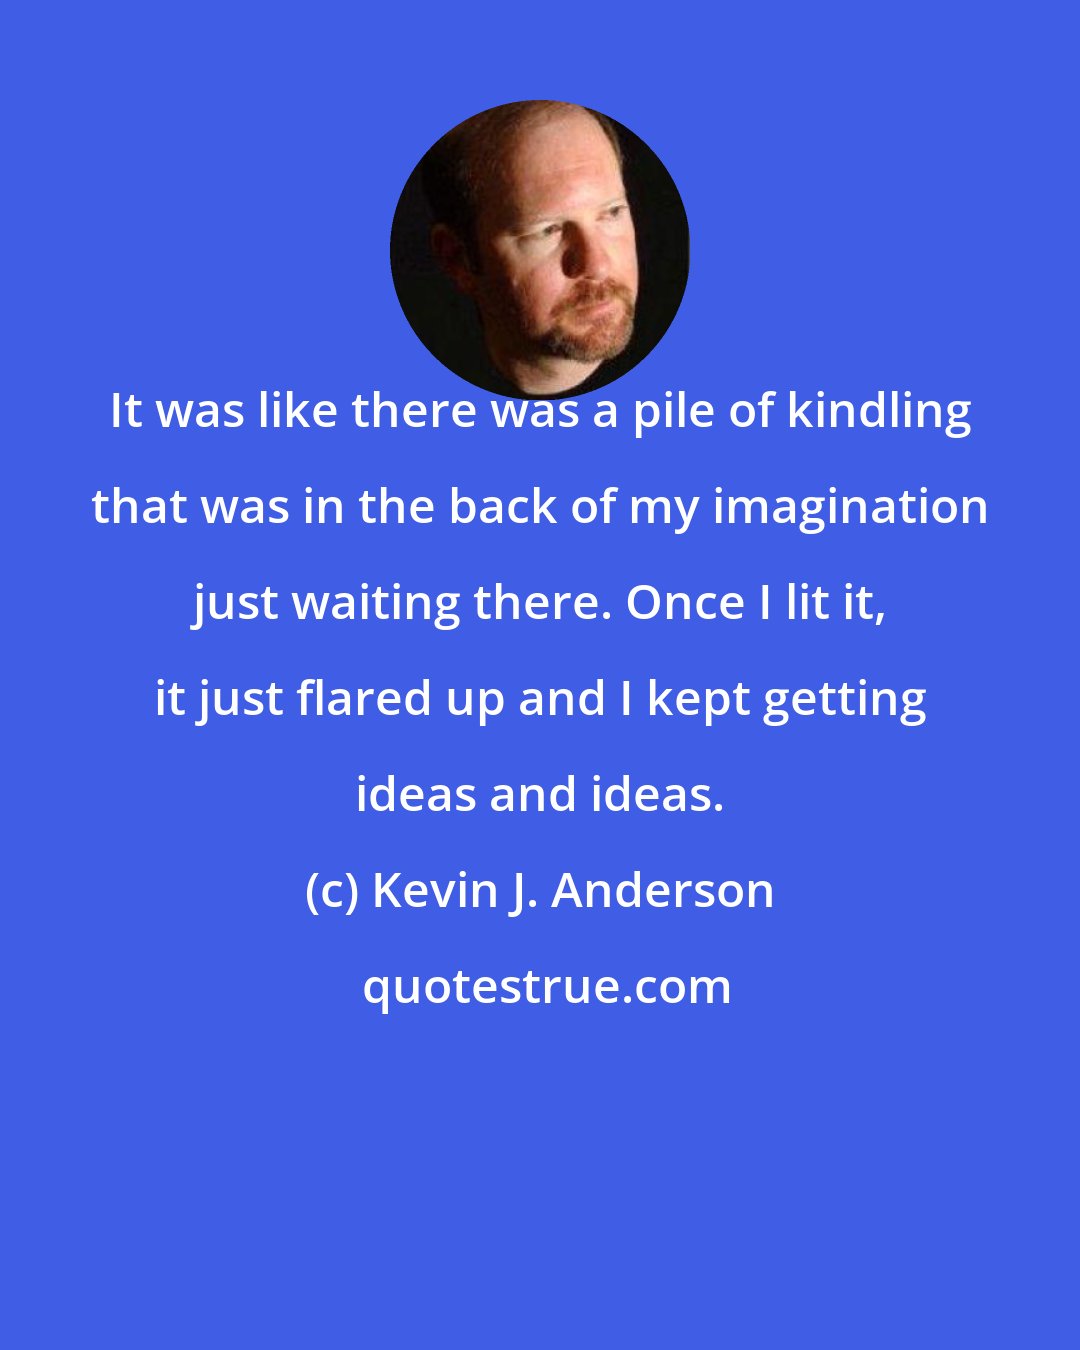 Kevin J. Anderson: It was like there was a pile of kindling that was in the back of my imagination just waiting there. Once I lit it, it just flared up and I kept getting ideas and ideas.